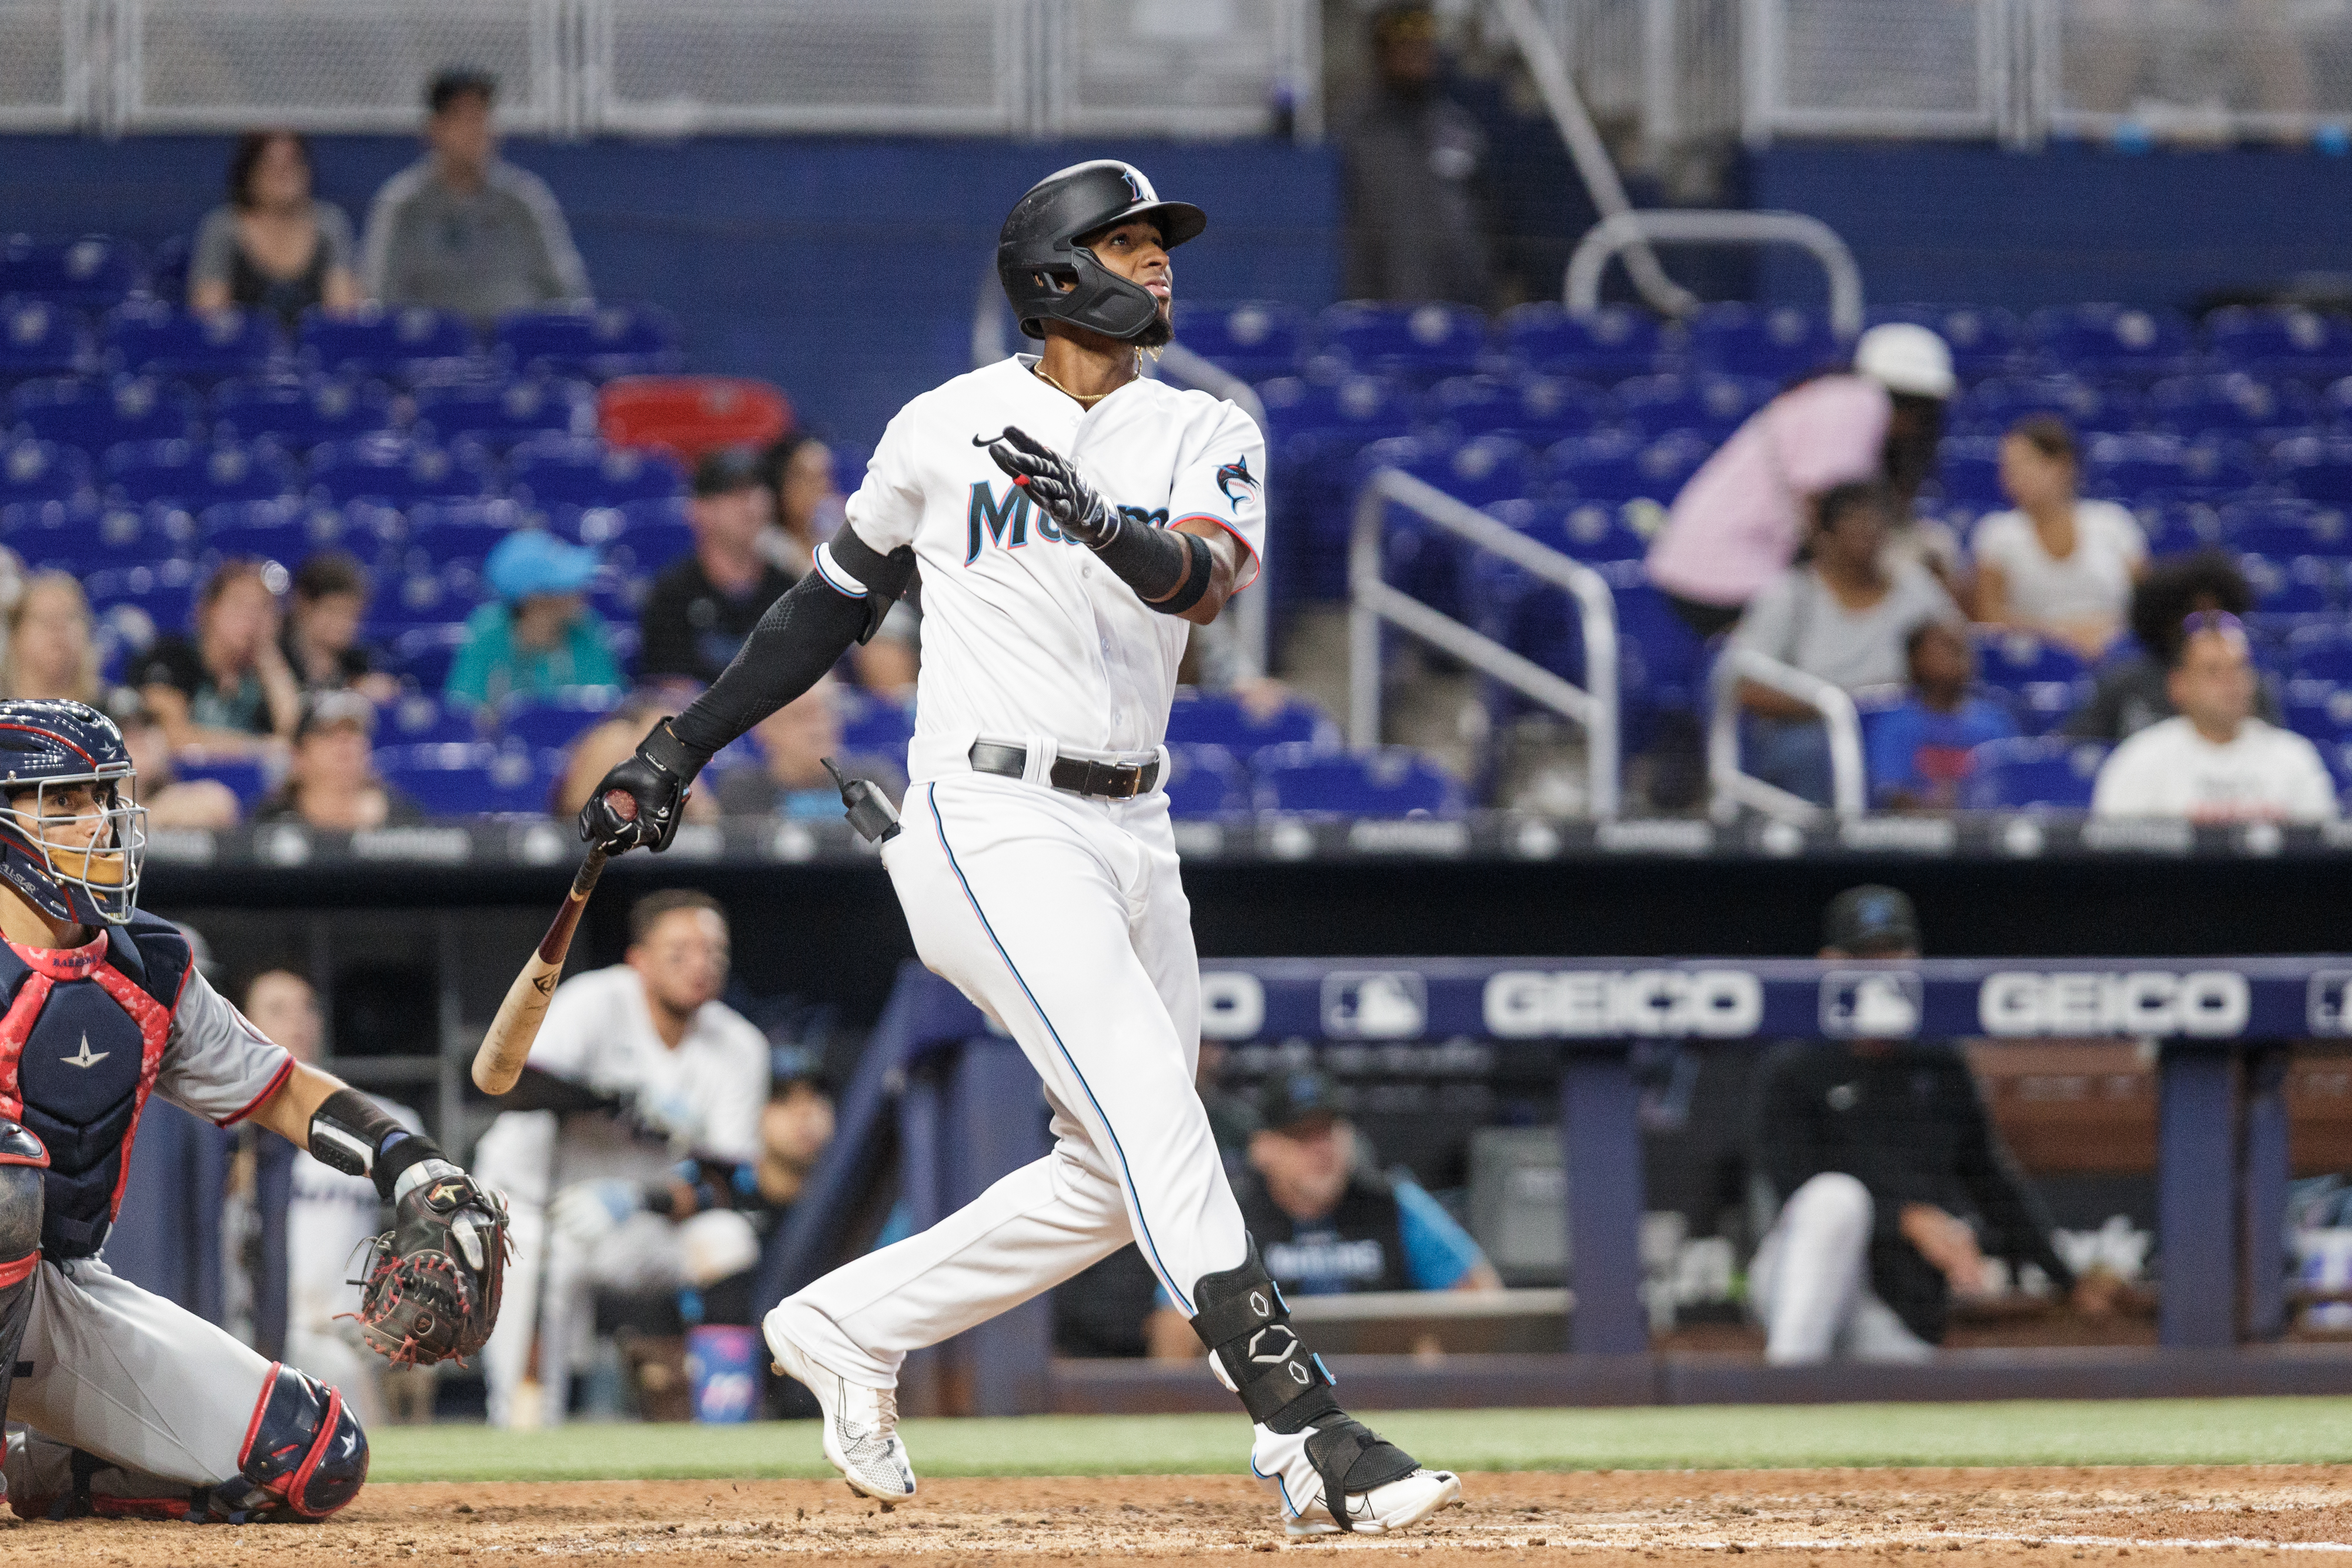 Lewin Díaz #34 of the Miami Marlins hits a home run during the eighth inning against the Washington Nationals at loanDepot park on September 25, 2022 in Miami, Florida.